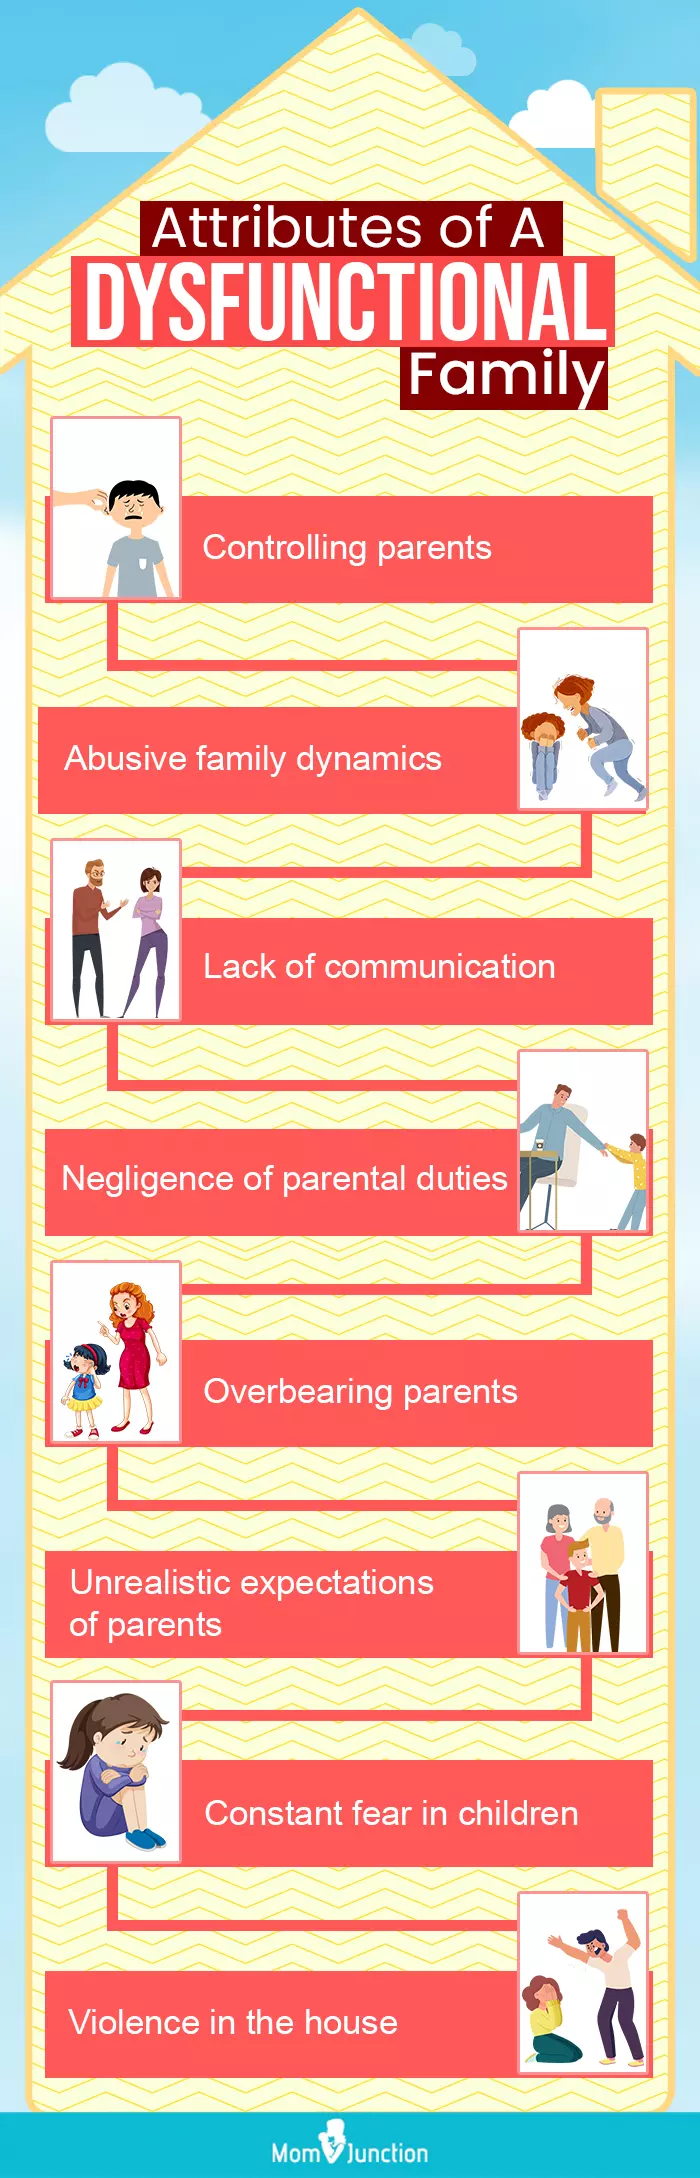 attributes of dysfunctional family (infographic)